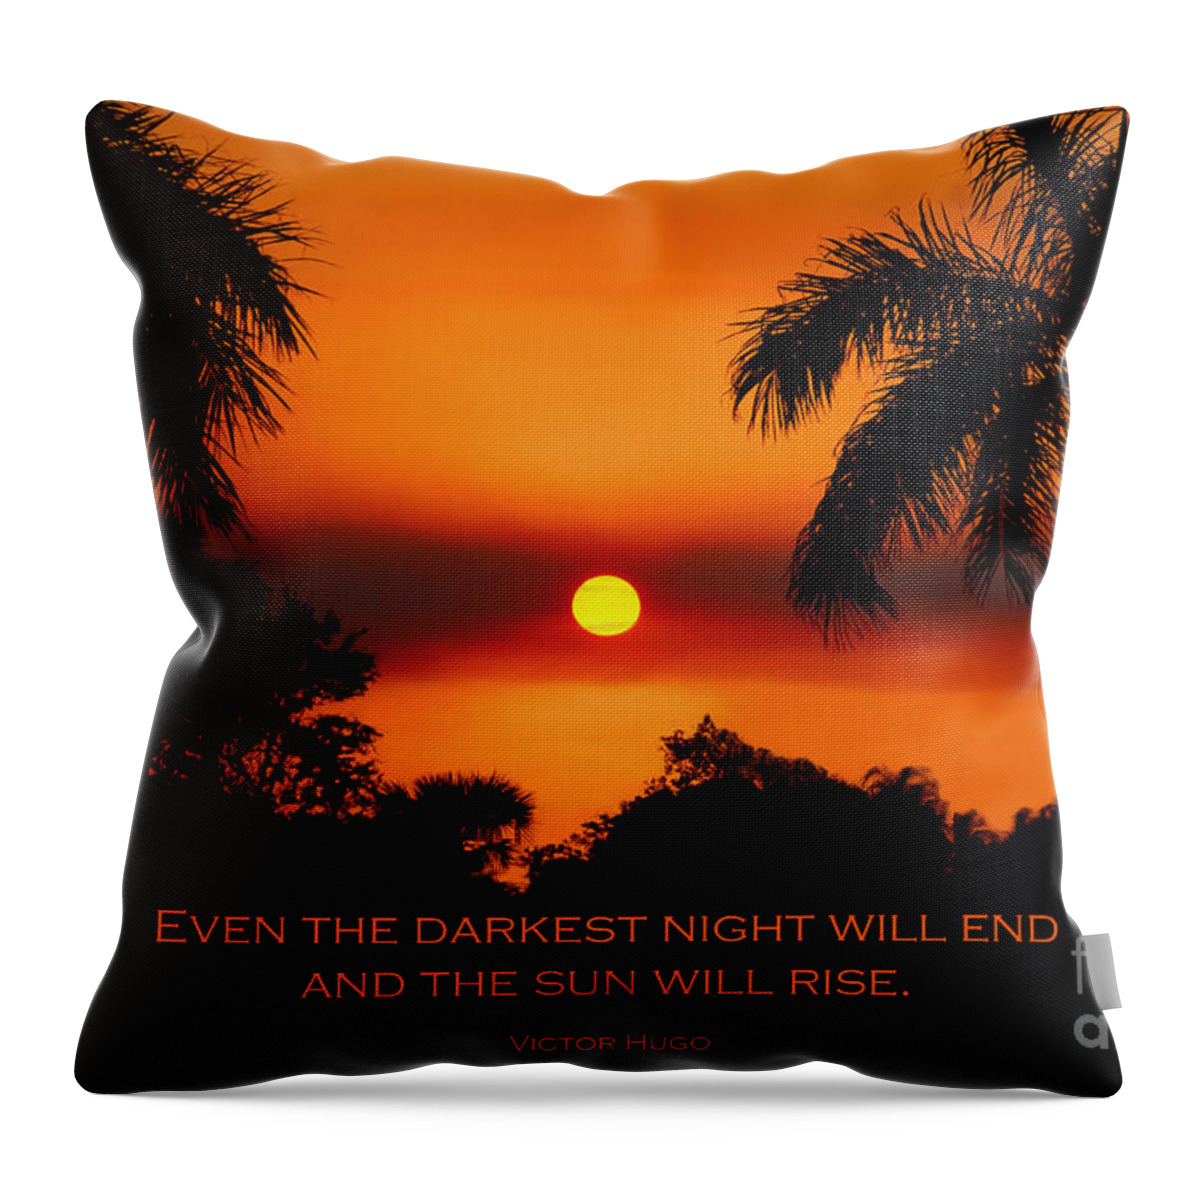 Victor Hugo Throw Pillow featuring the photograph 16- Victor Hugo by Joseph Keane